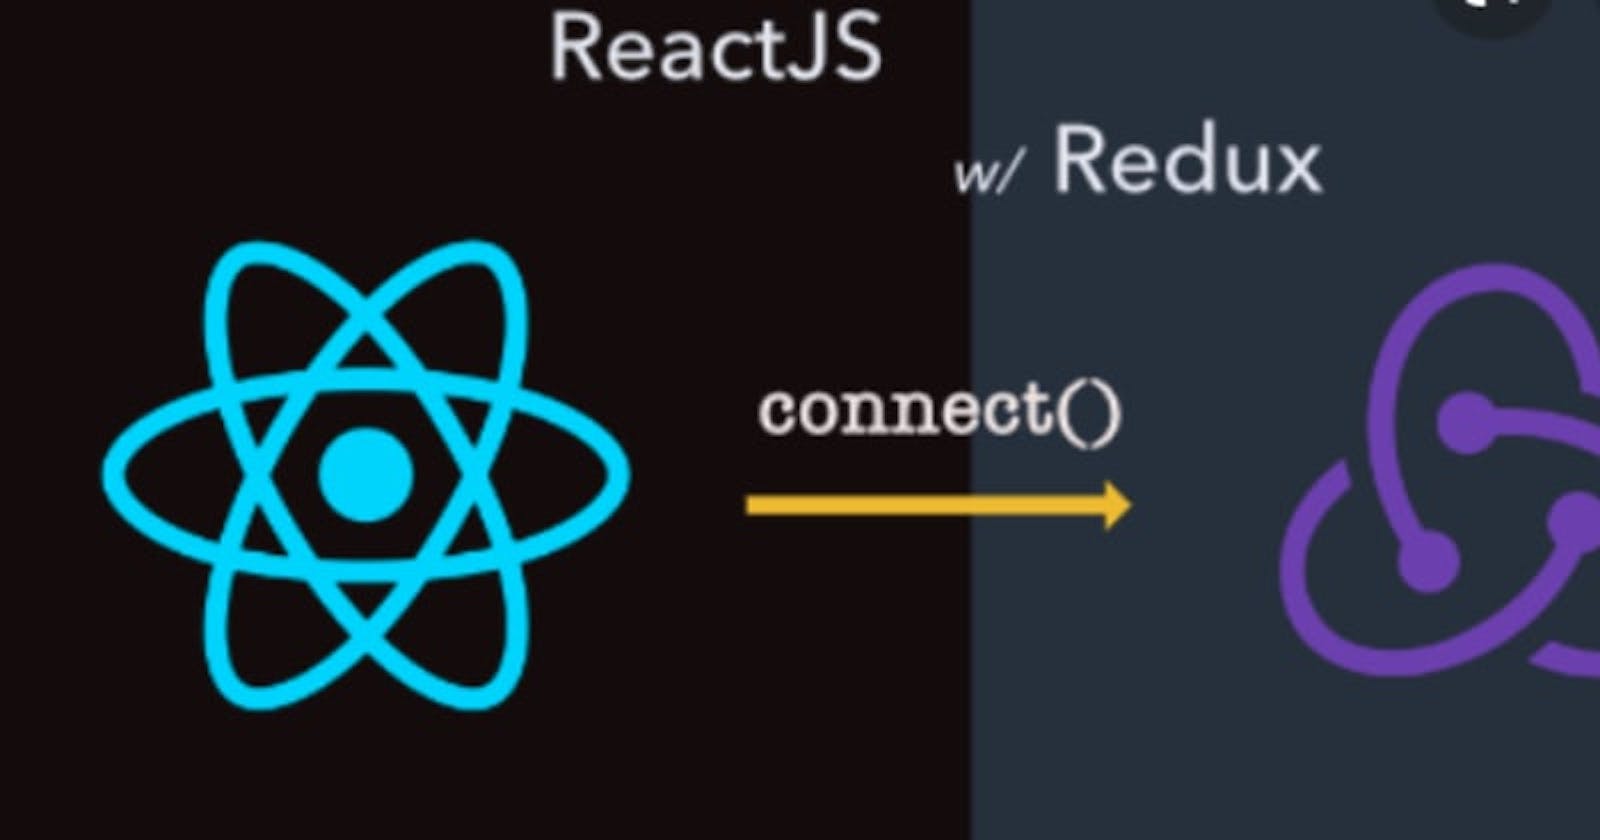 A look at the Redux connect() function